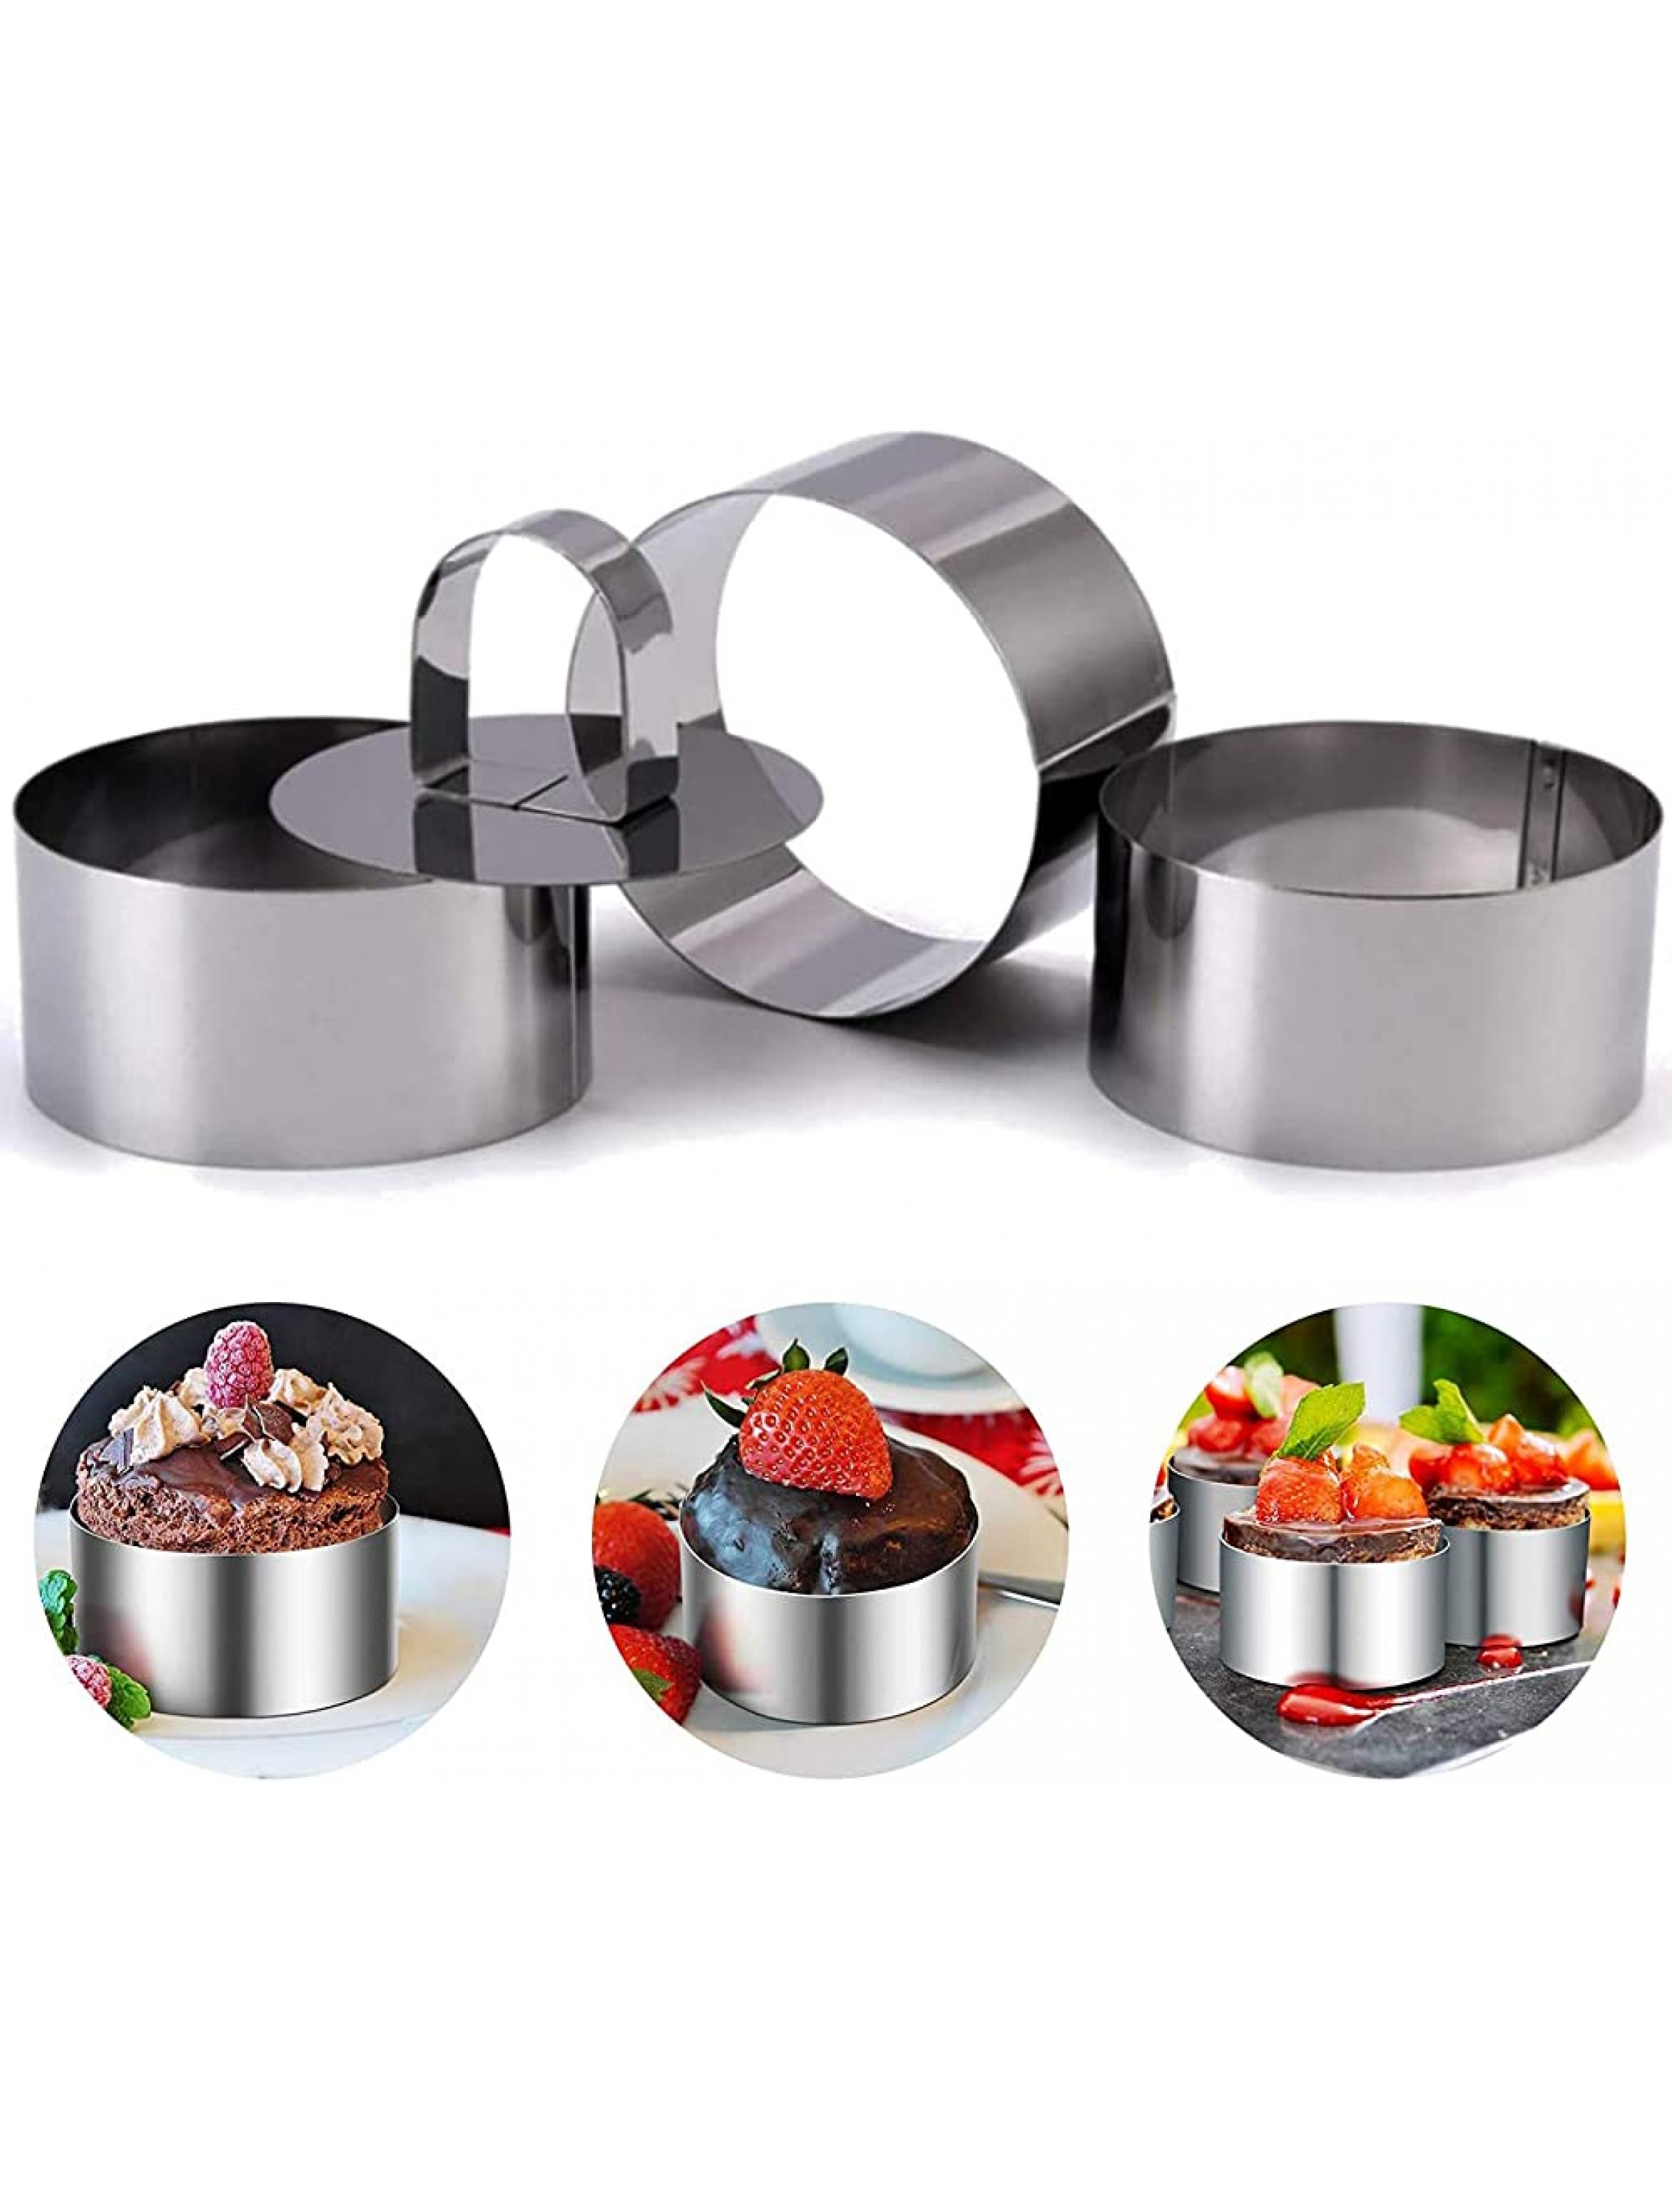 Set of 4 Round Stainless Steel Small Cake Rings for Baking Mousse Mini Cake Molds and Pastry Rings Food Ring Mould Dessert Ring Molds for Cooking Pastry Cake Set of 4 with 4 Pusher - BXRR3Y9GT